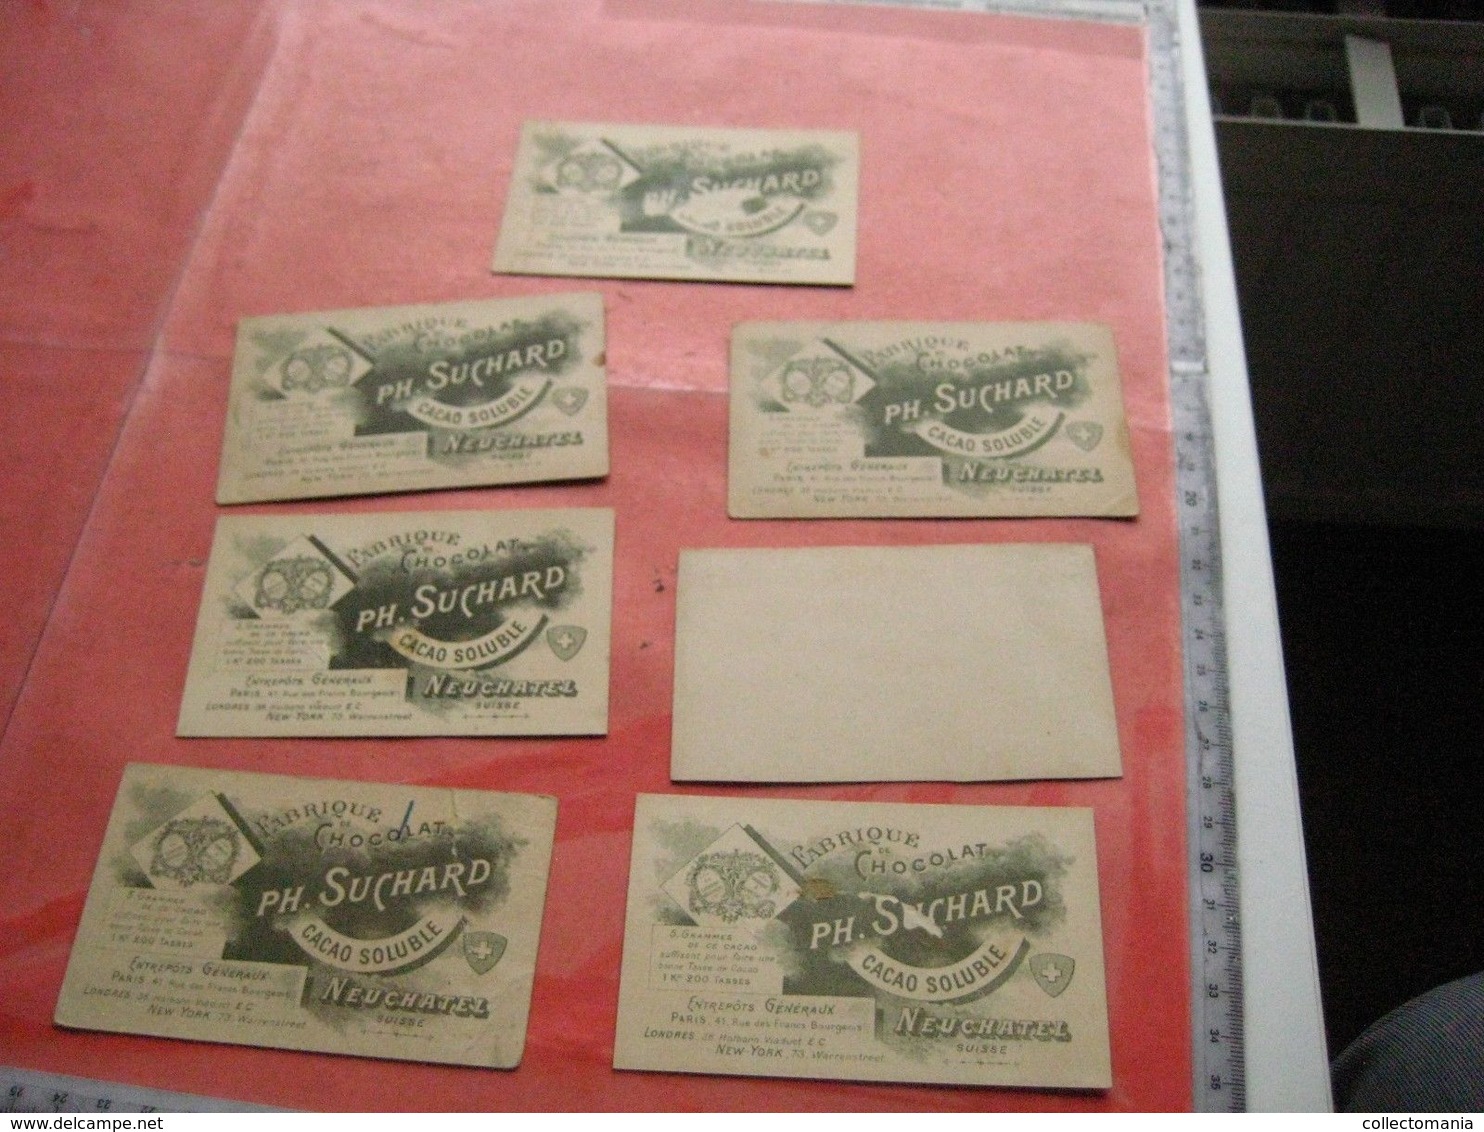 7 Cards Litho C1900 Chocolate SUCHARD Section V Nr 22 - White Part To Be Painted Similar By Child - Views From SUISSE - Sammlungen